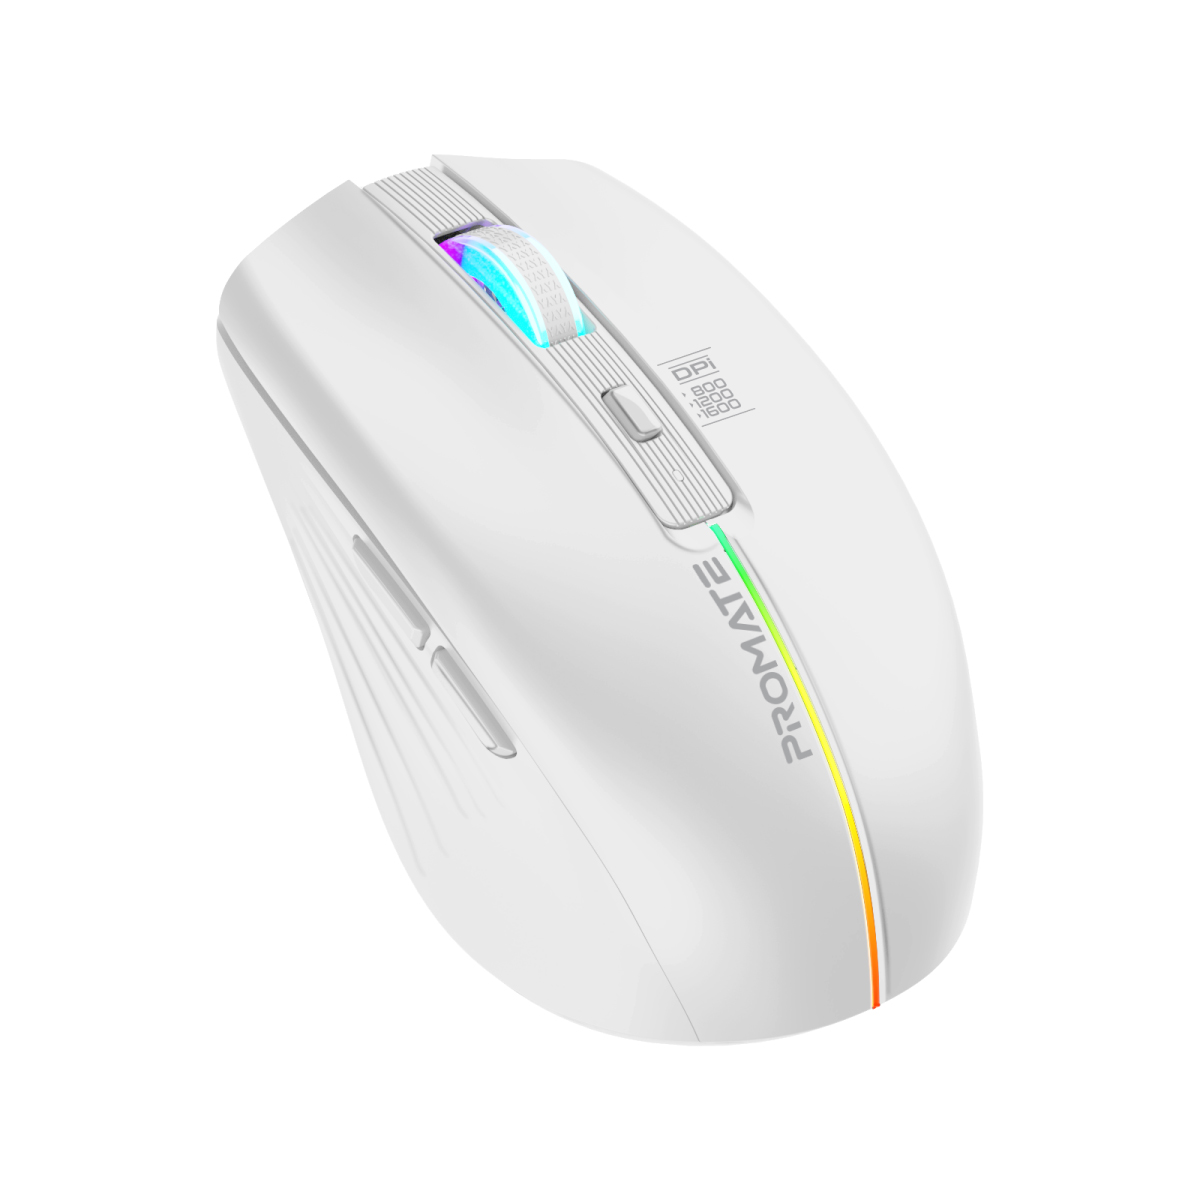 Rapoo VT9 Air Wireless Mouse RGB Office Gaming Mouse For Laptop, Black